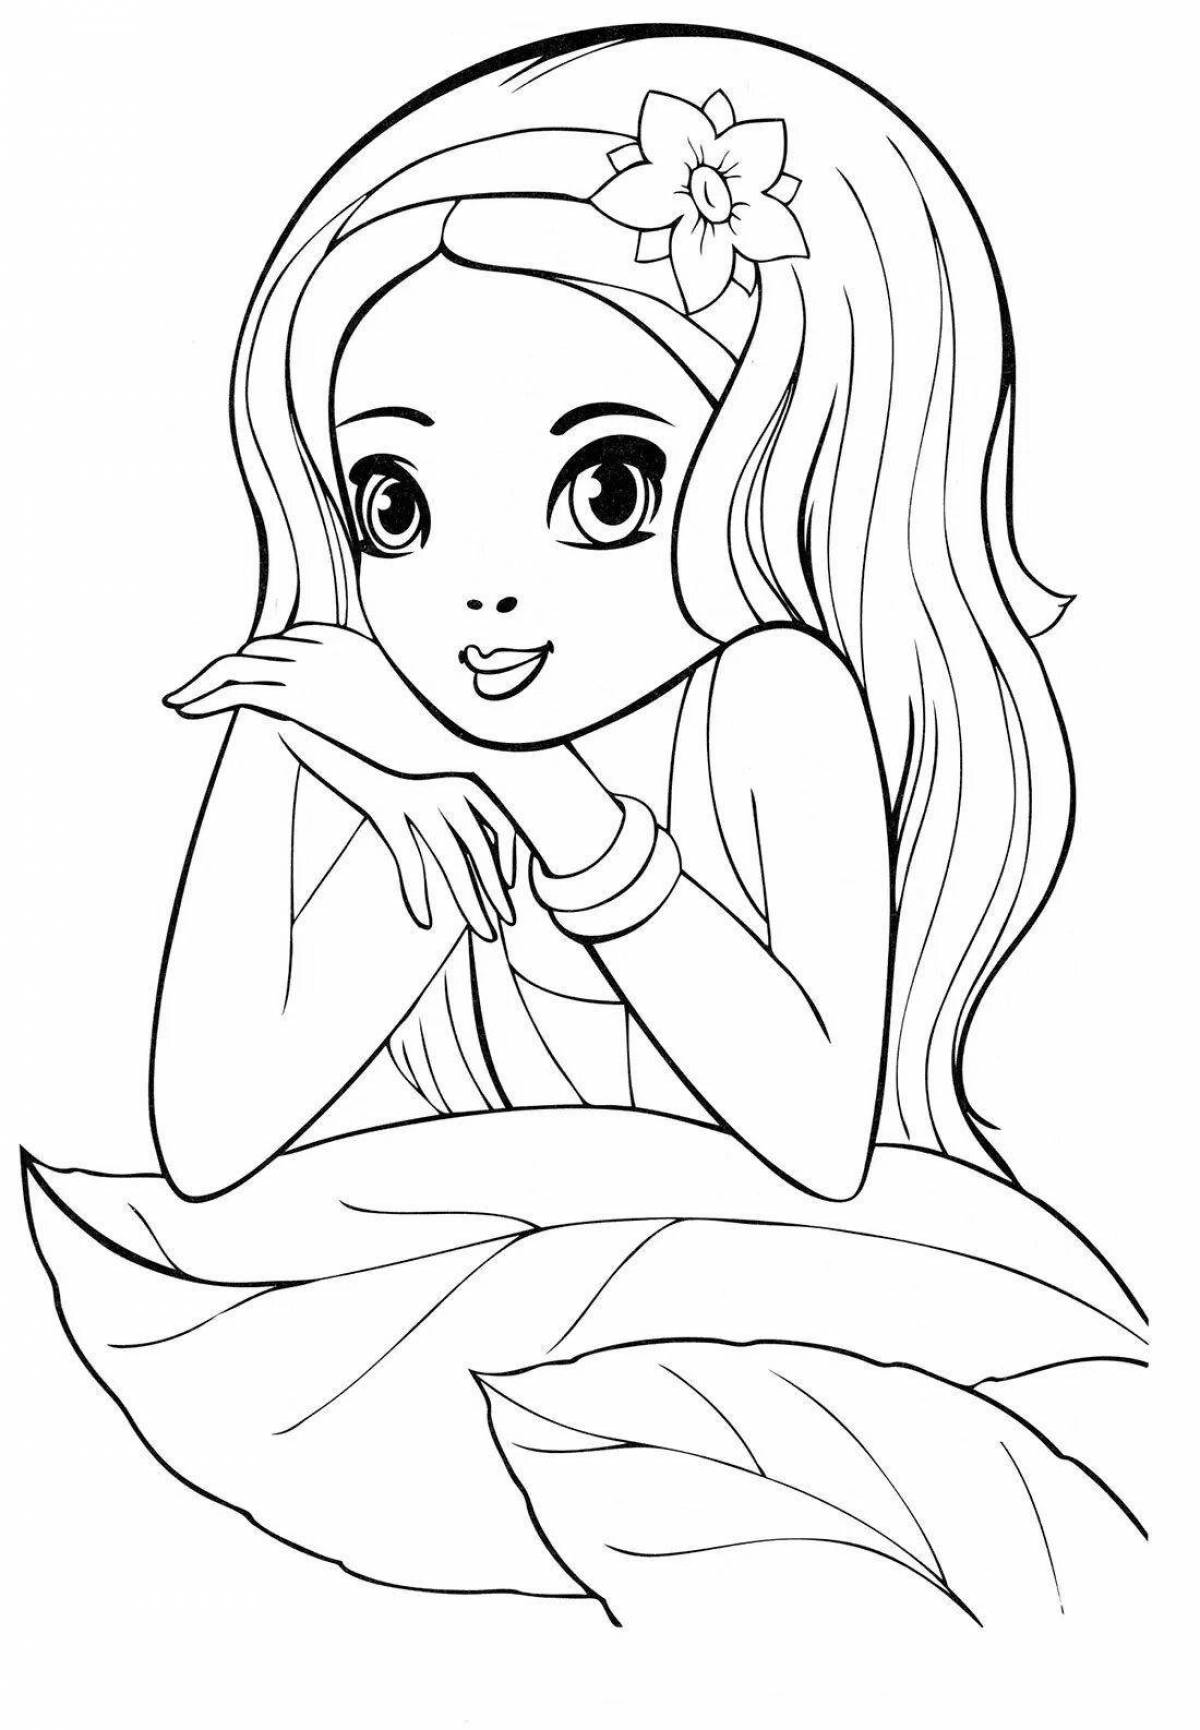 Fancy coloring pages decorated